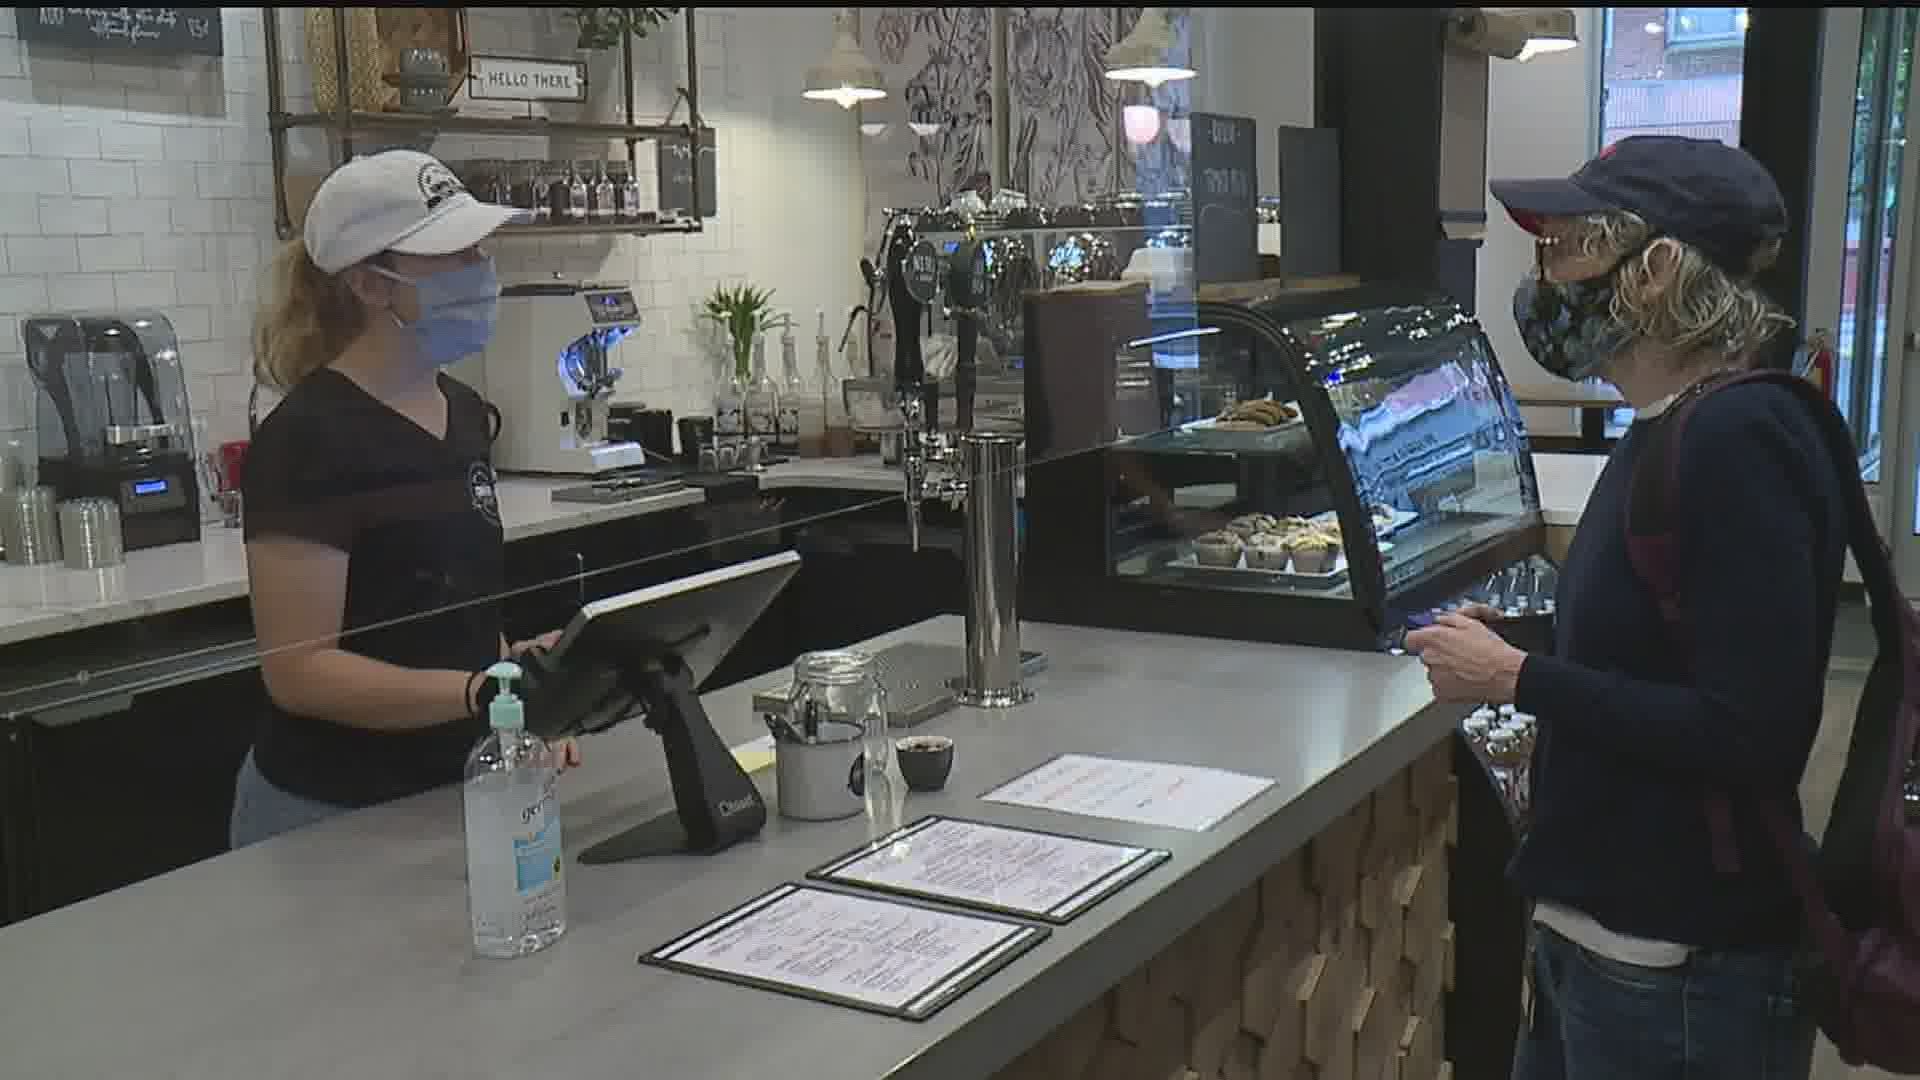 "It's amazing, we're excited to be here for Lancaster," said Mark Fisher. Hew Holland Coffee opened its doors to customers this week in the city.